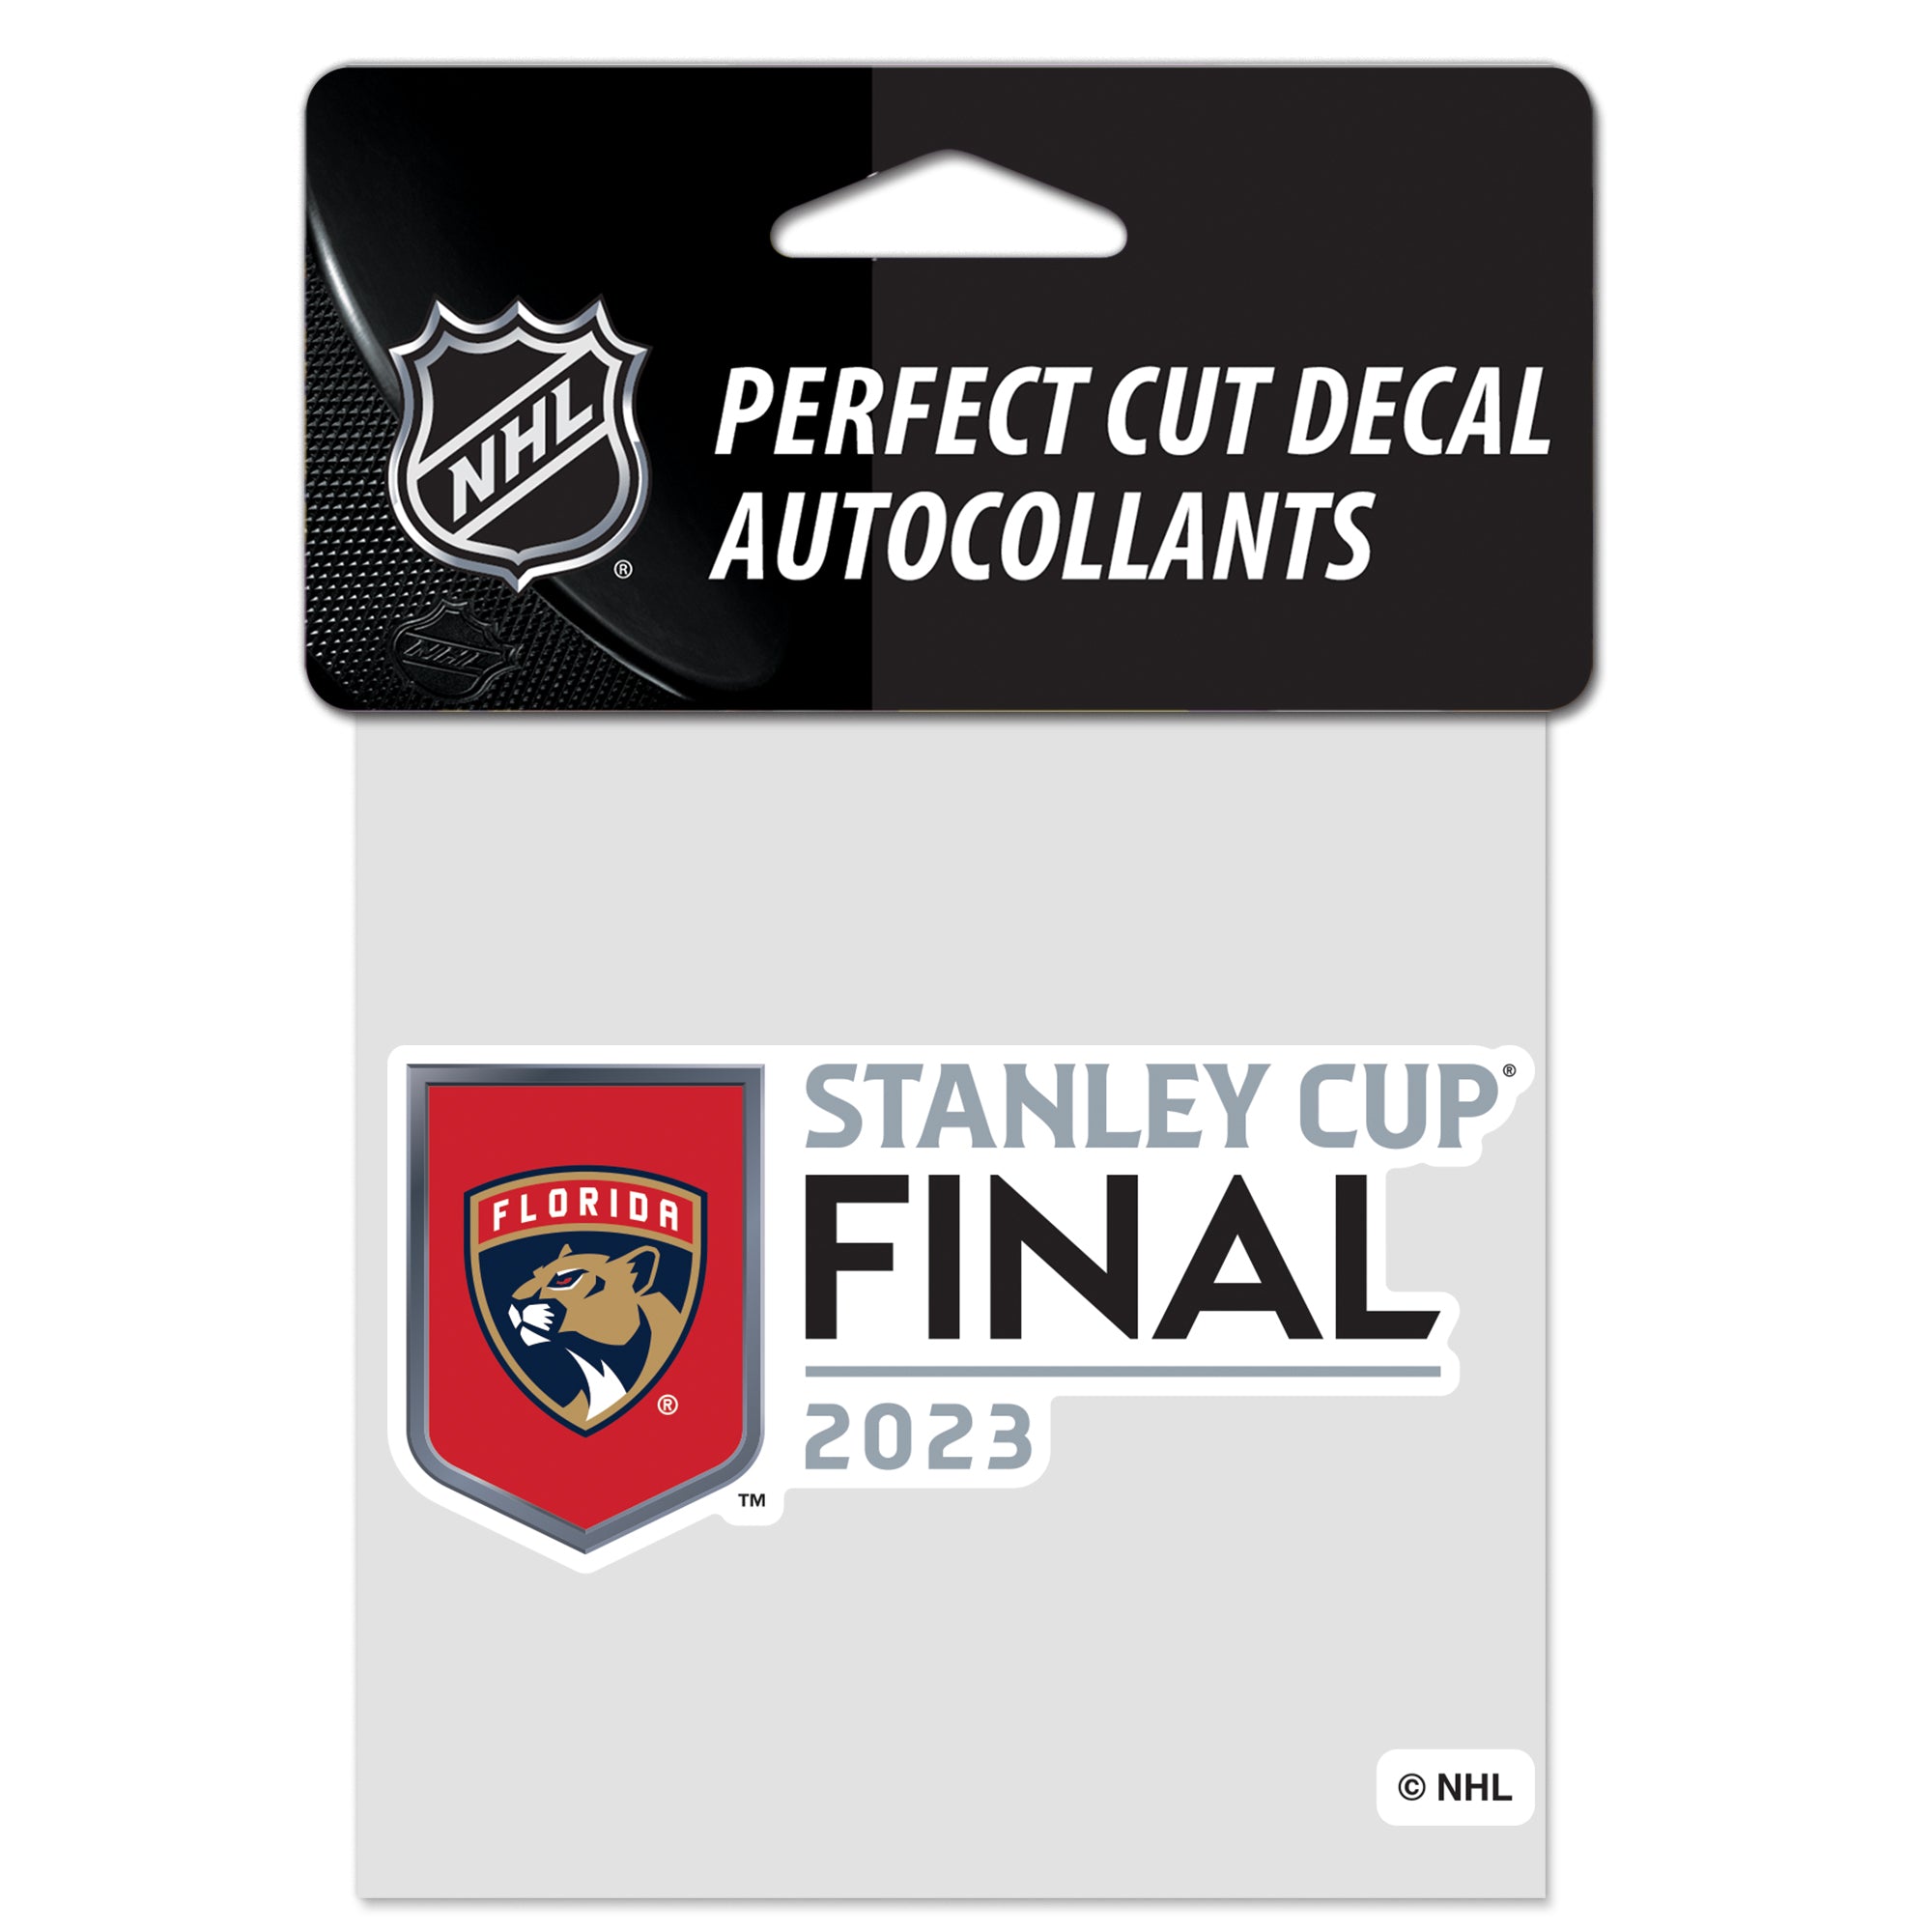 Florida Panthers WinCraft 2023 Stanley Cup Final 4" x 4" Perfect Cut Decal